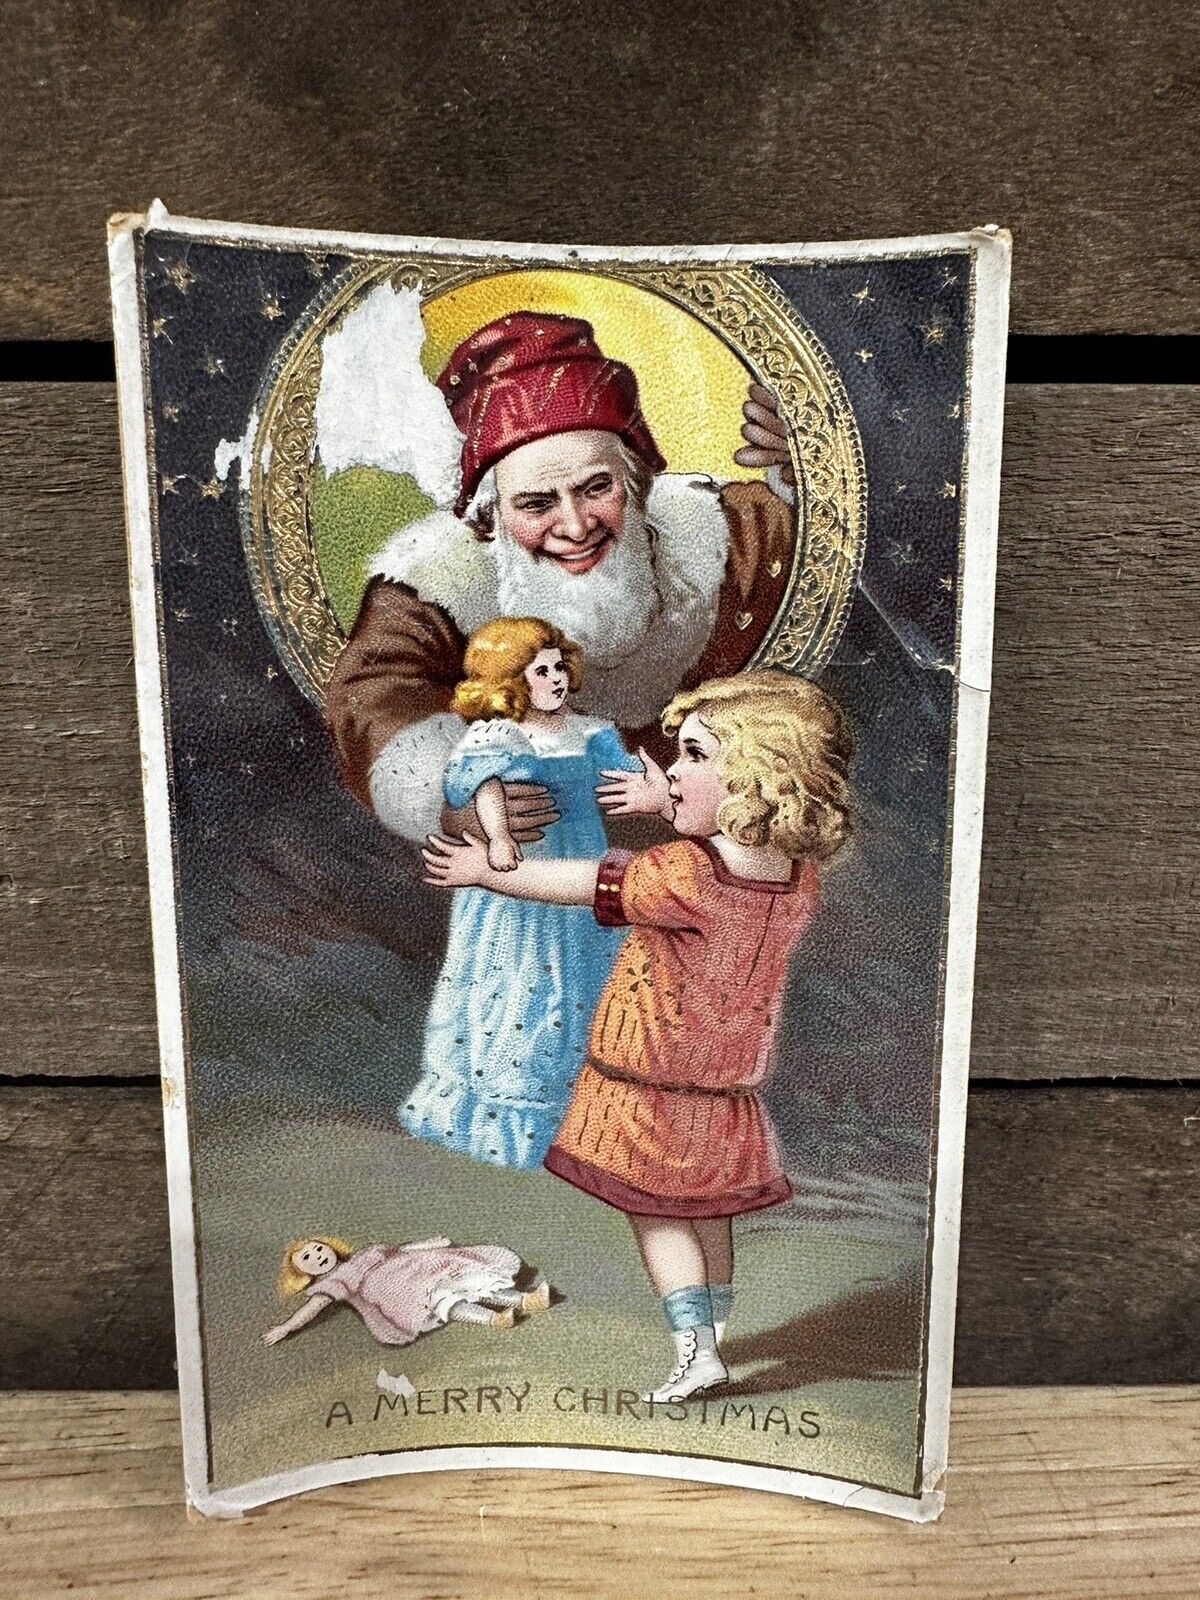 Antique 1913 Christmas Post Card “Santa Delivering Doll To Girl”